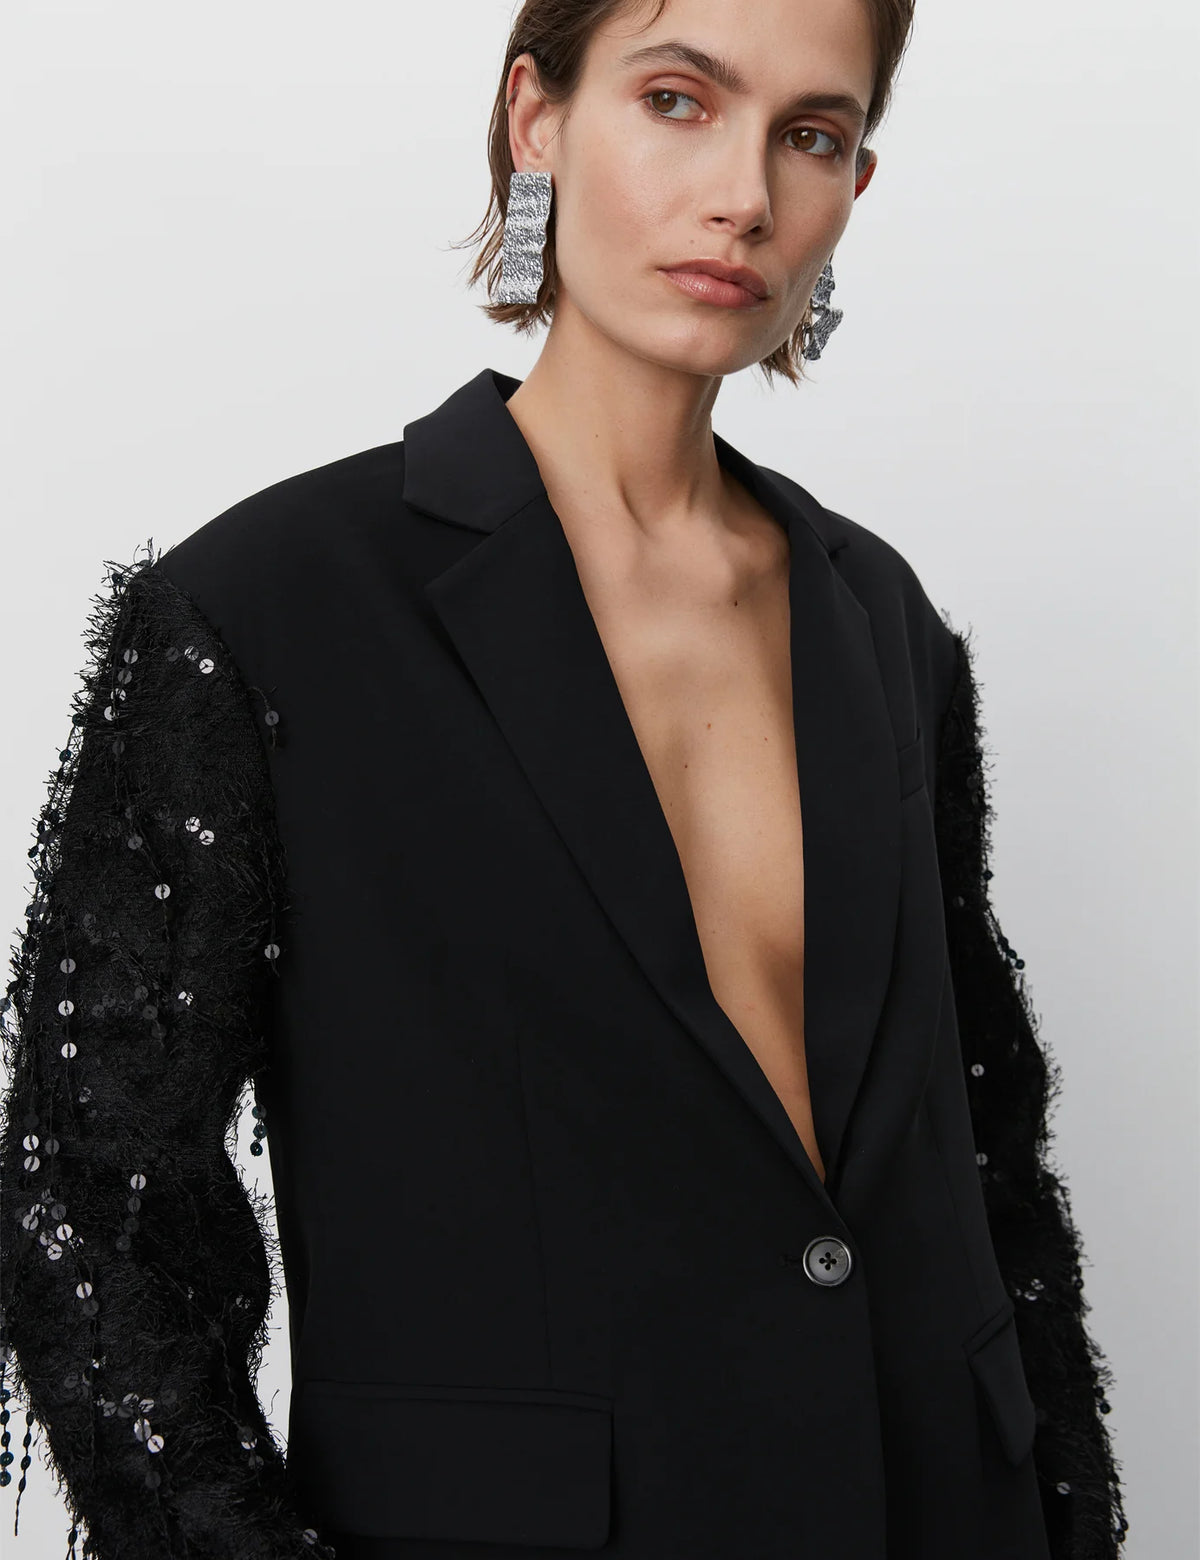 Black blazer with single breasted features and sequin and tassel sleeves black